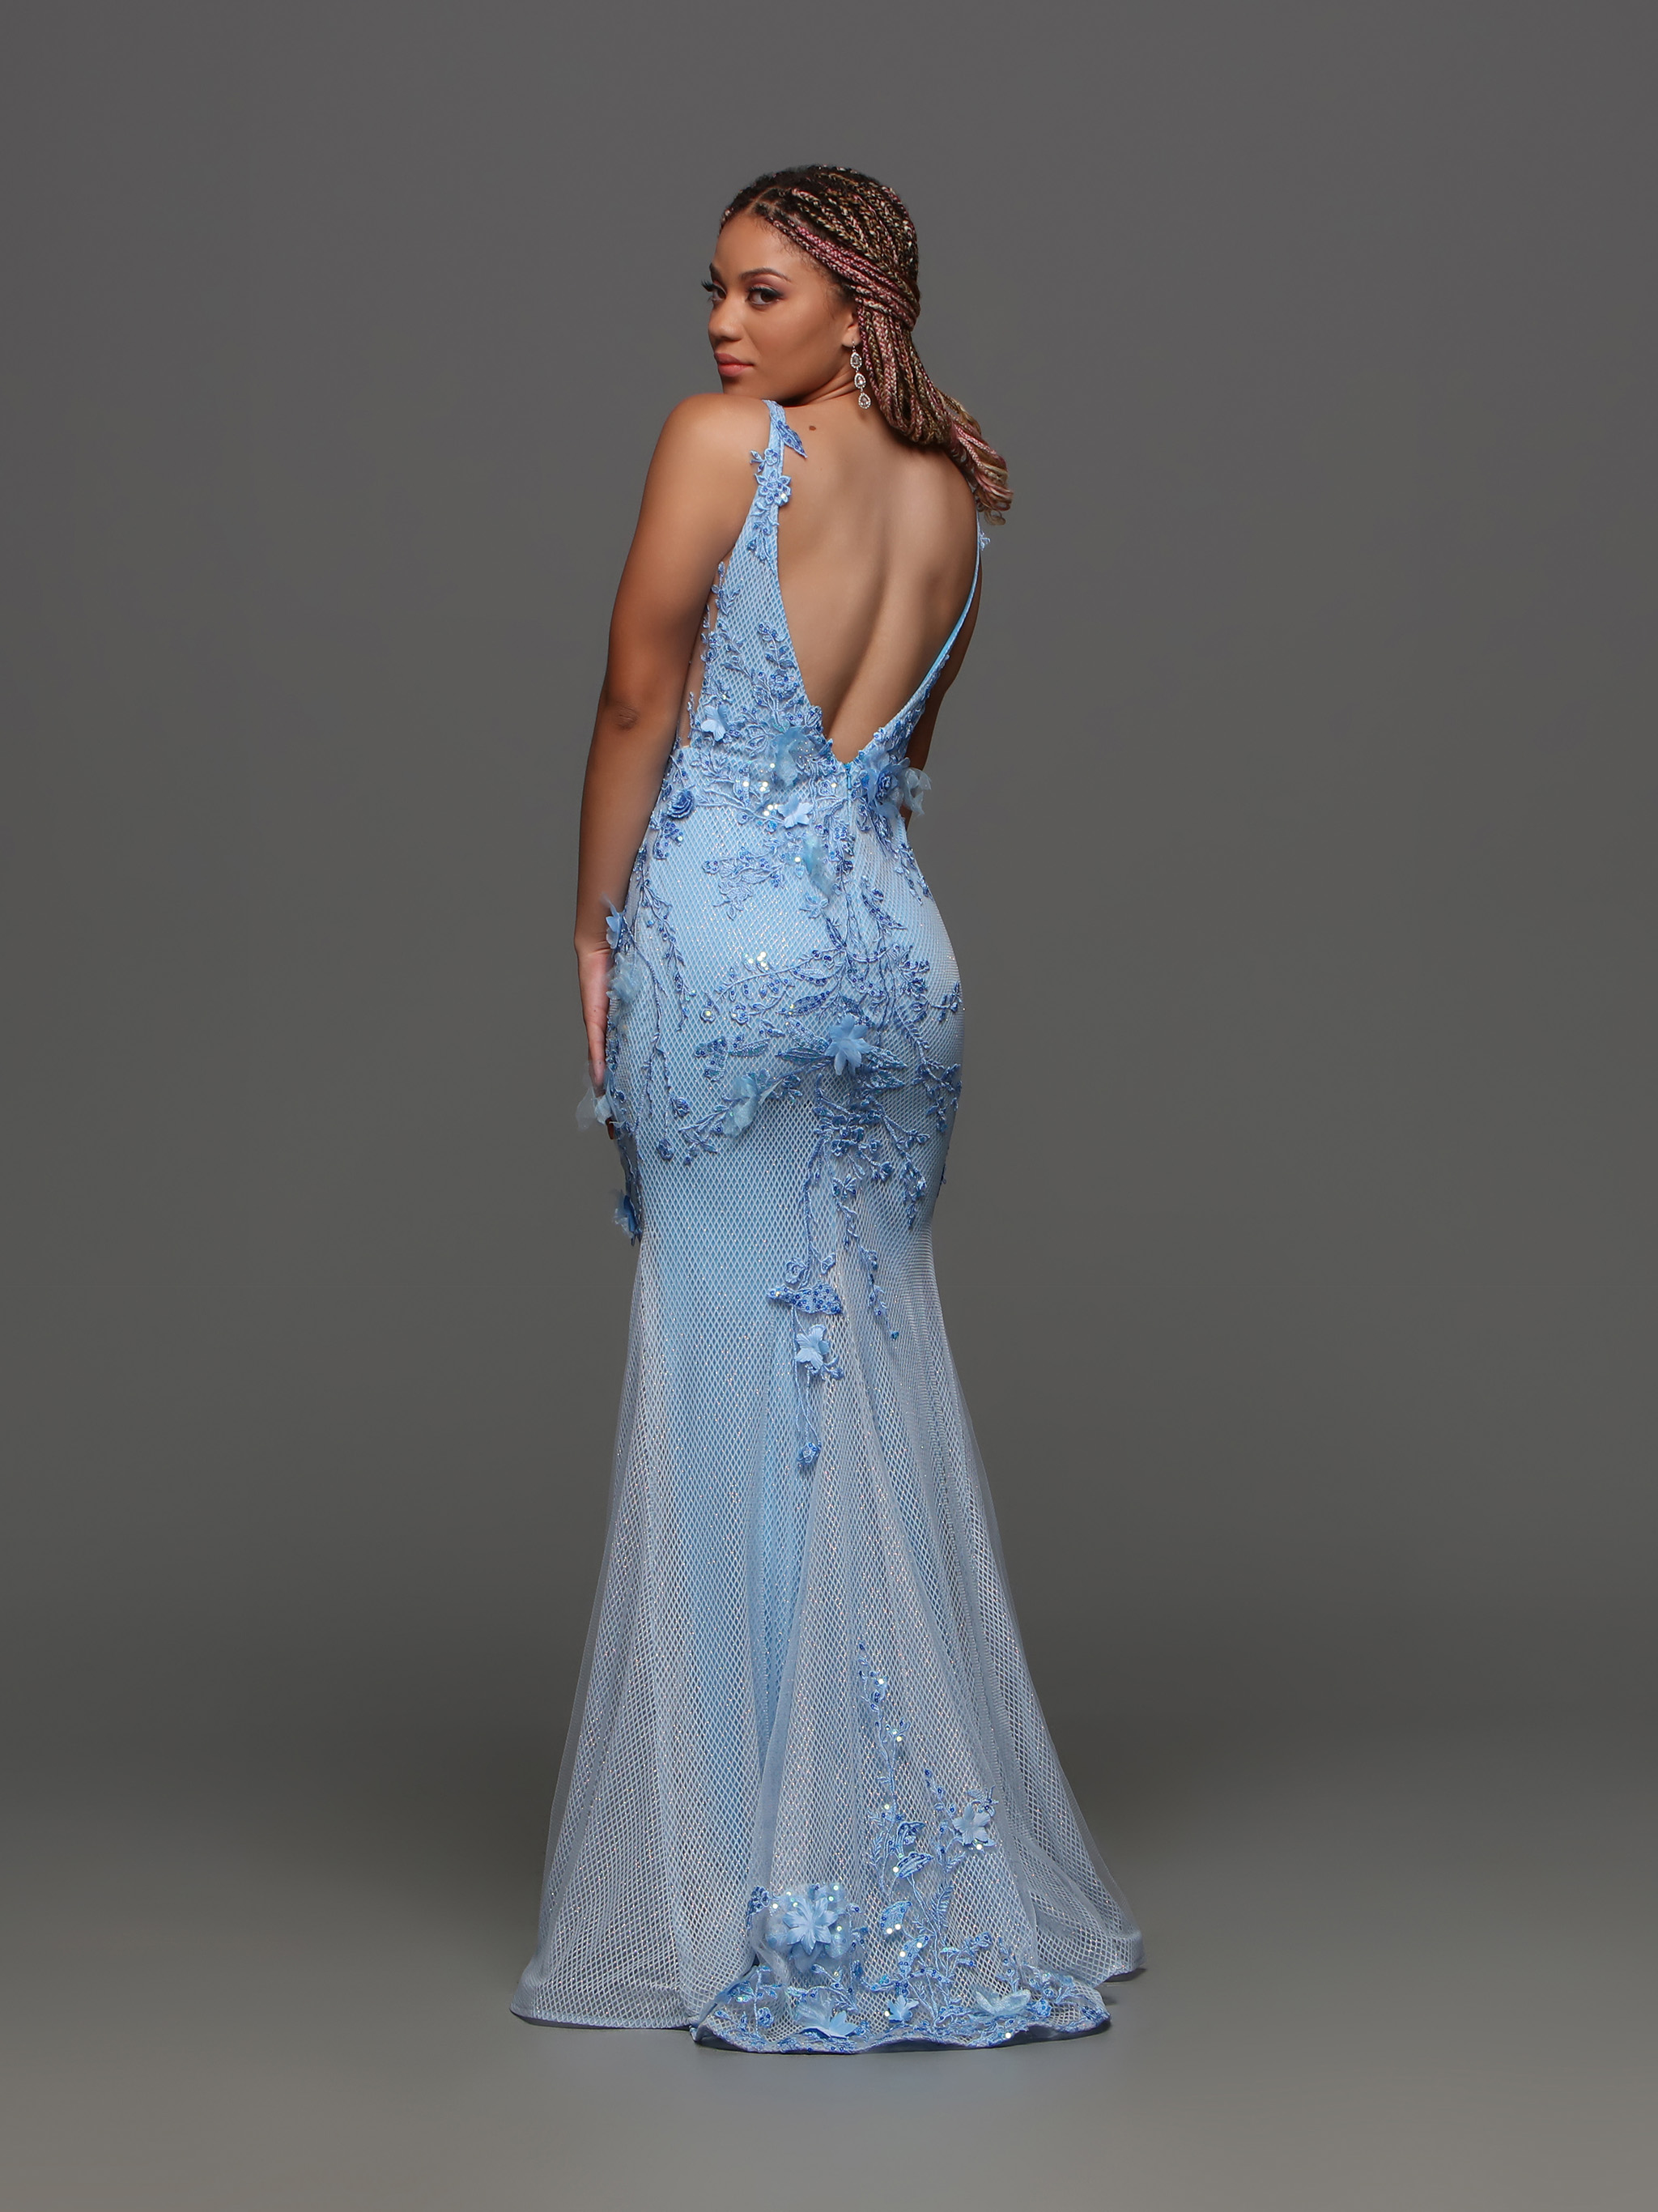 Image showing back view of style #72403